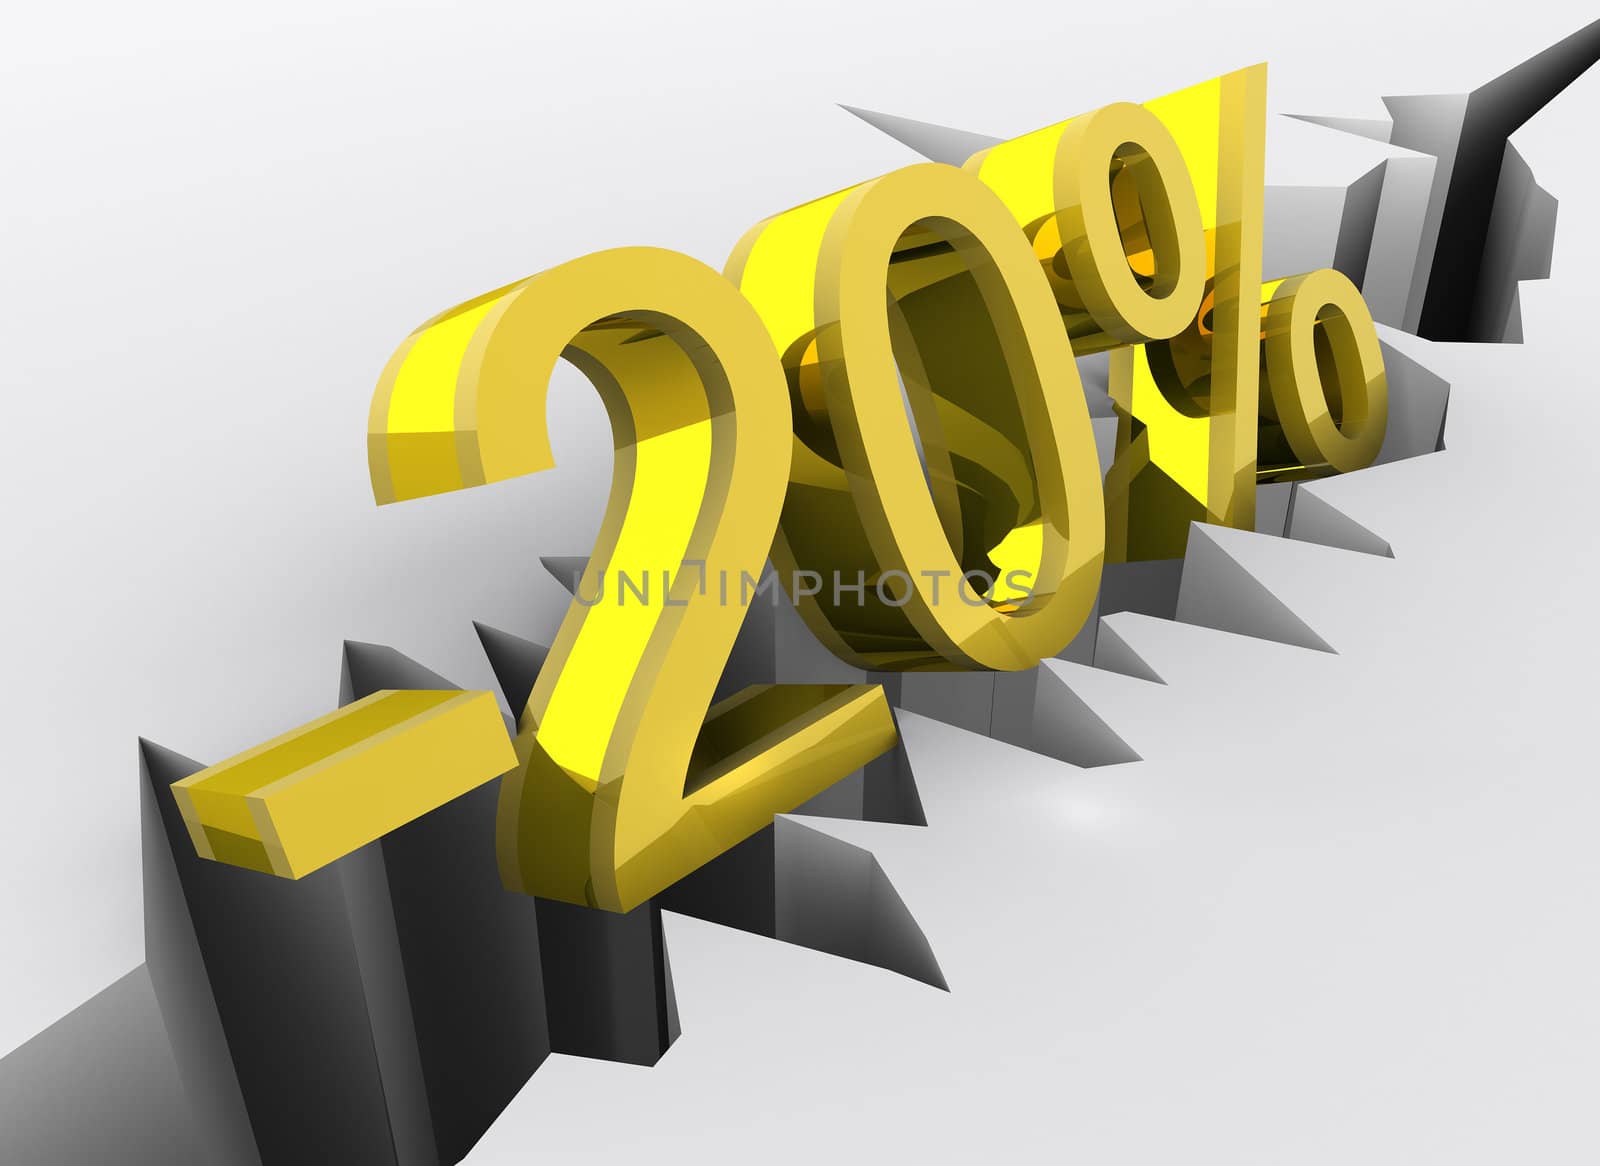 Concept of 20 percent discount portrayed by golden 3d number (minus twenty percent) rendered and isolated on white background with slight reflection in the ground.